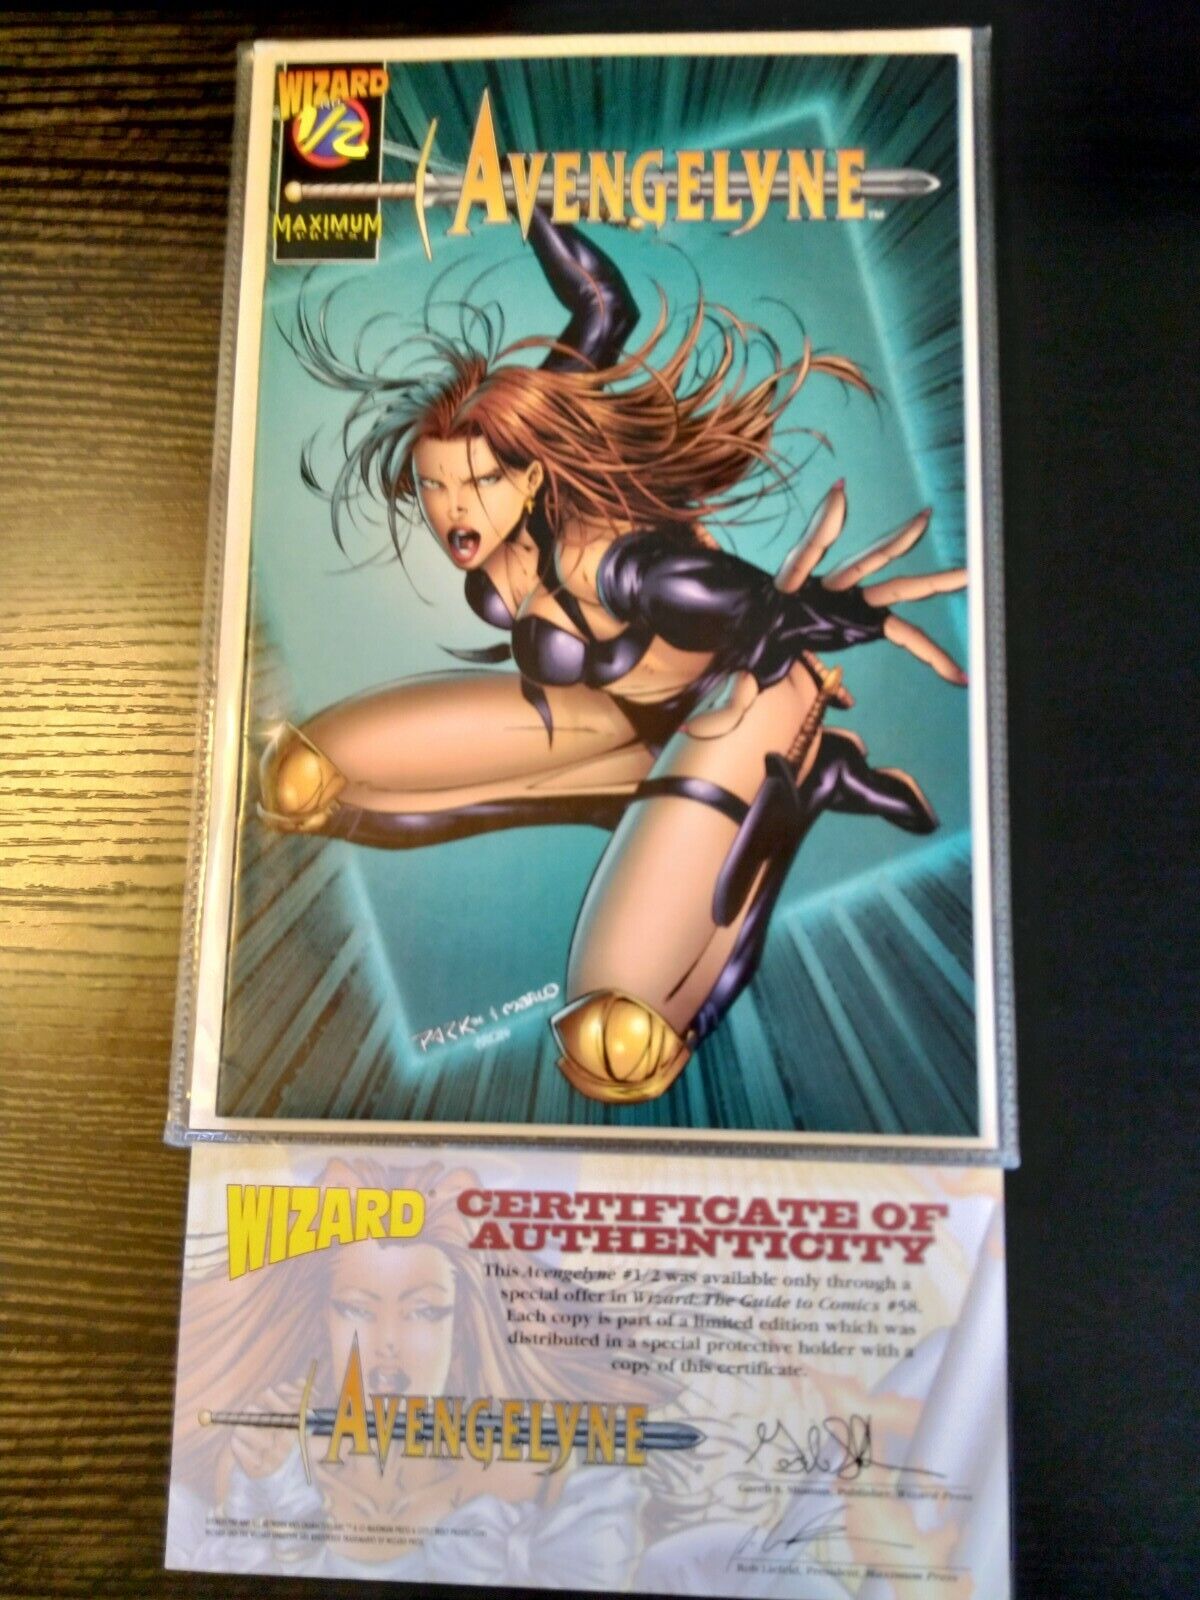 Avengelyne #1/2-Maximum Press/Wizard 1995-NM with COA Signed by Rob Liefeld